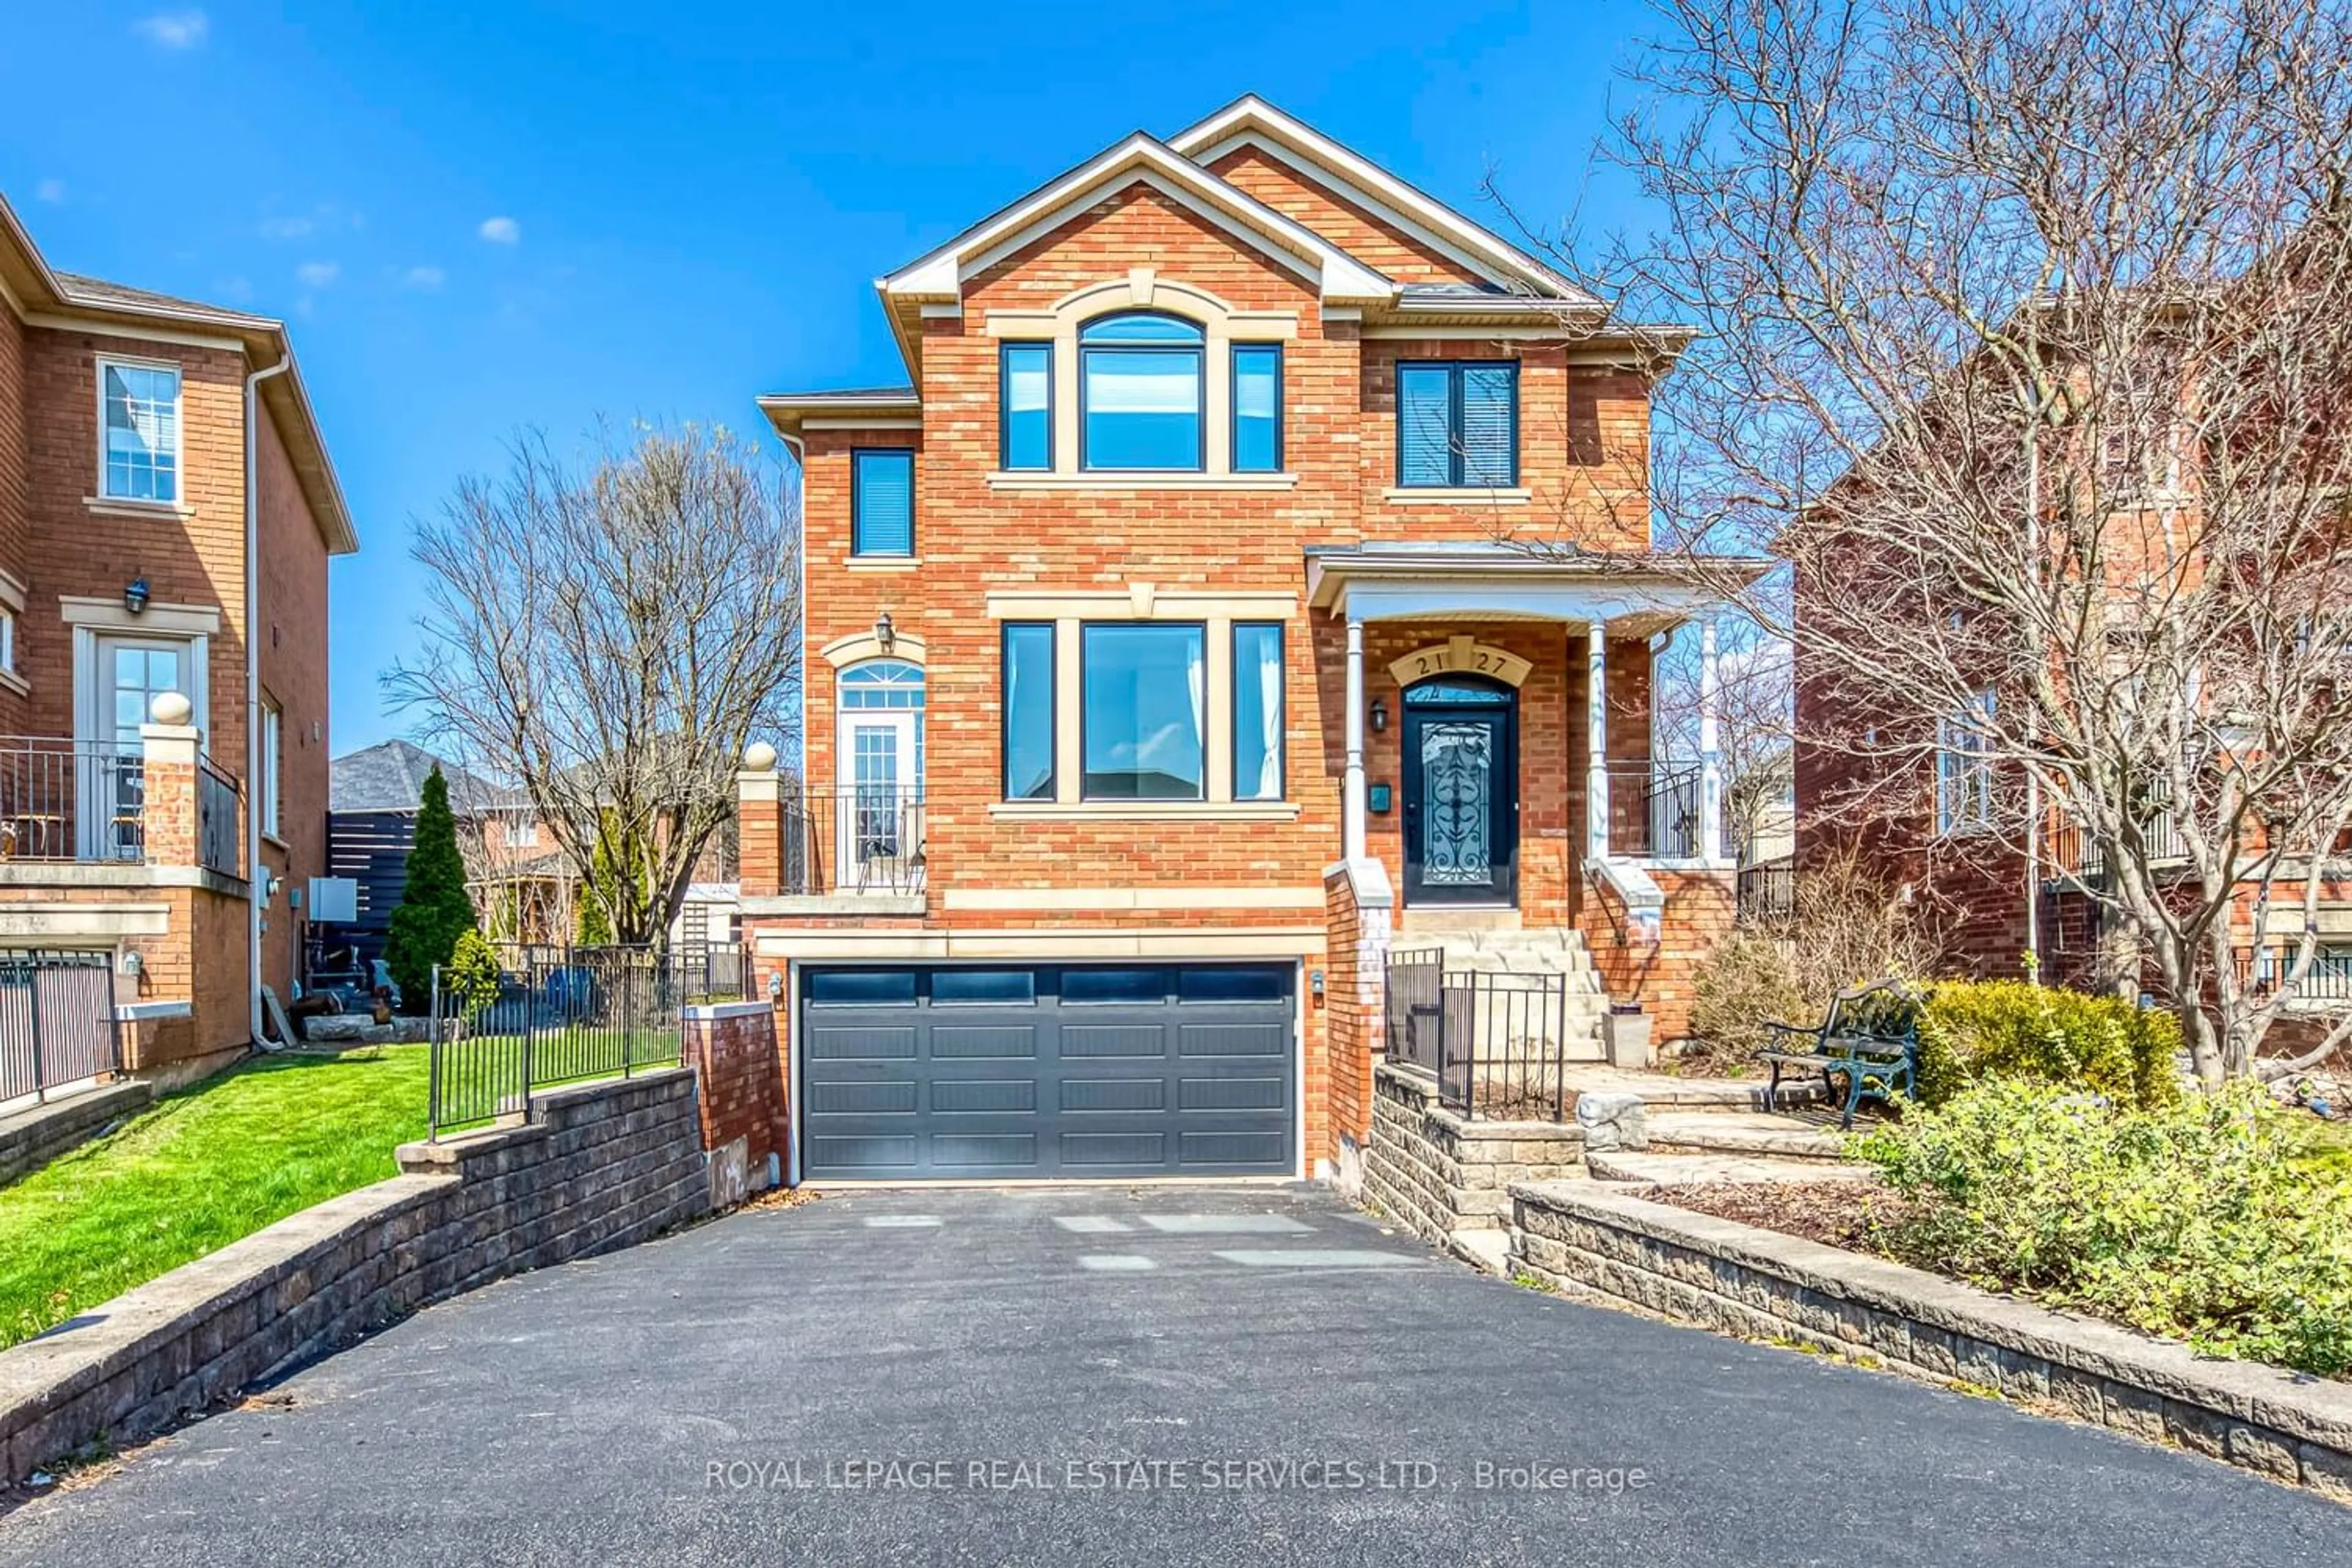 Home with brick exterior material for 2127 Nightingale Way, Oakville Ontario L6M 3R9